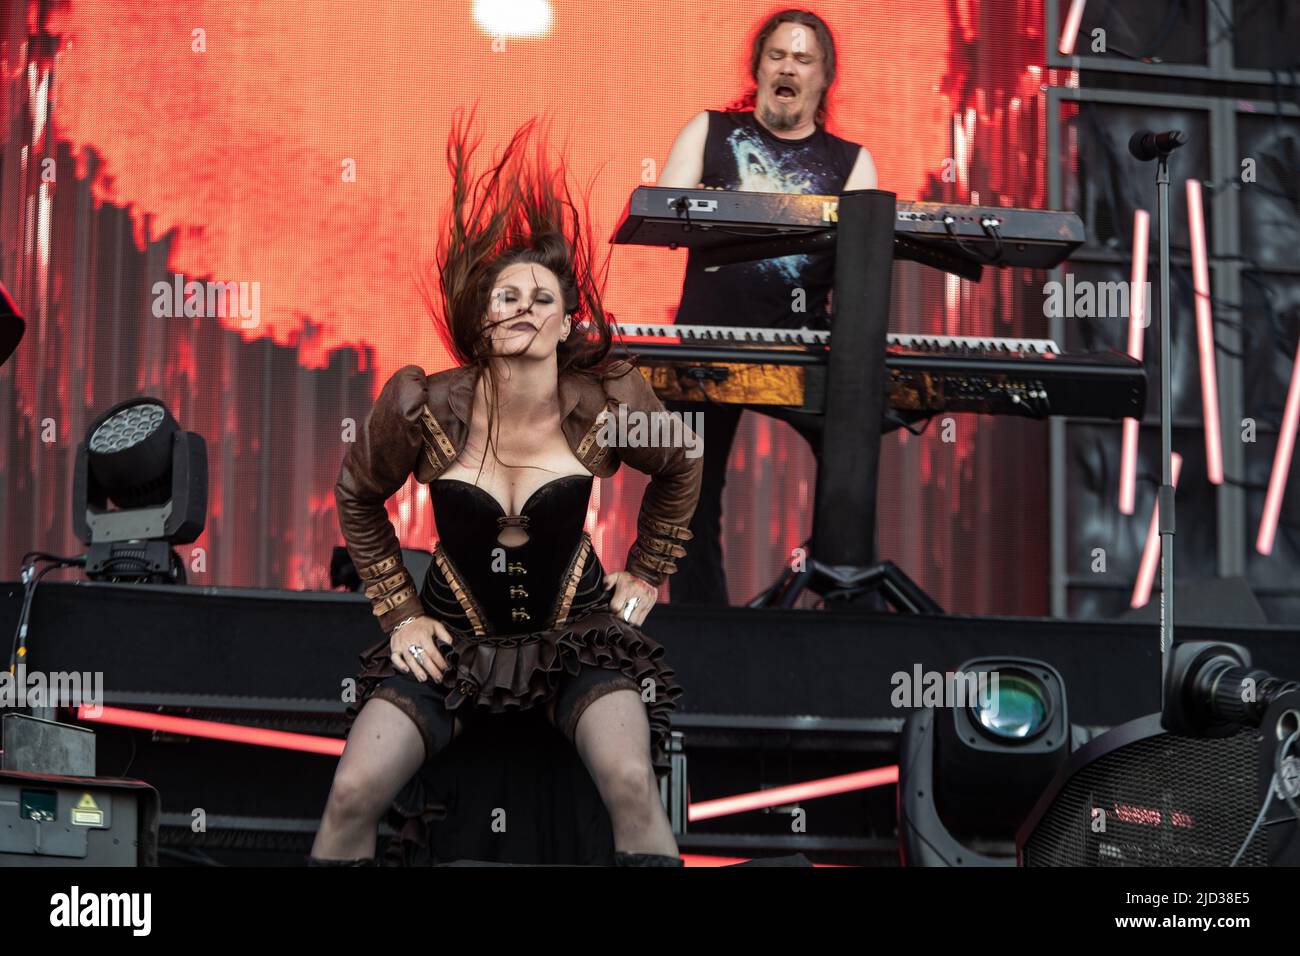 Landgraaf, Belgium. 17th June, 2022. 2022-06-17 17:37:39 LANDGRAAF - The Icelandic rock band Nightwish with lead singer Floor Jansen will perform during the first day of the Pinkpop music festival. ANP PAUL BERGEN netherlands out - belgium out Credit: ANP/Alamy Live News Stock Photo